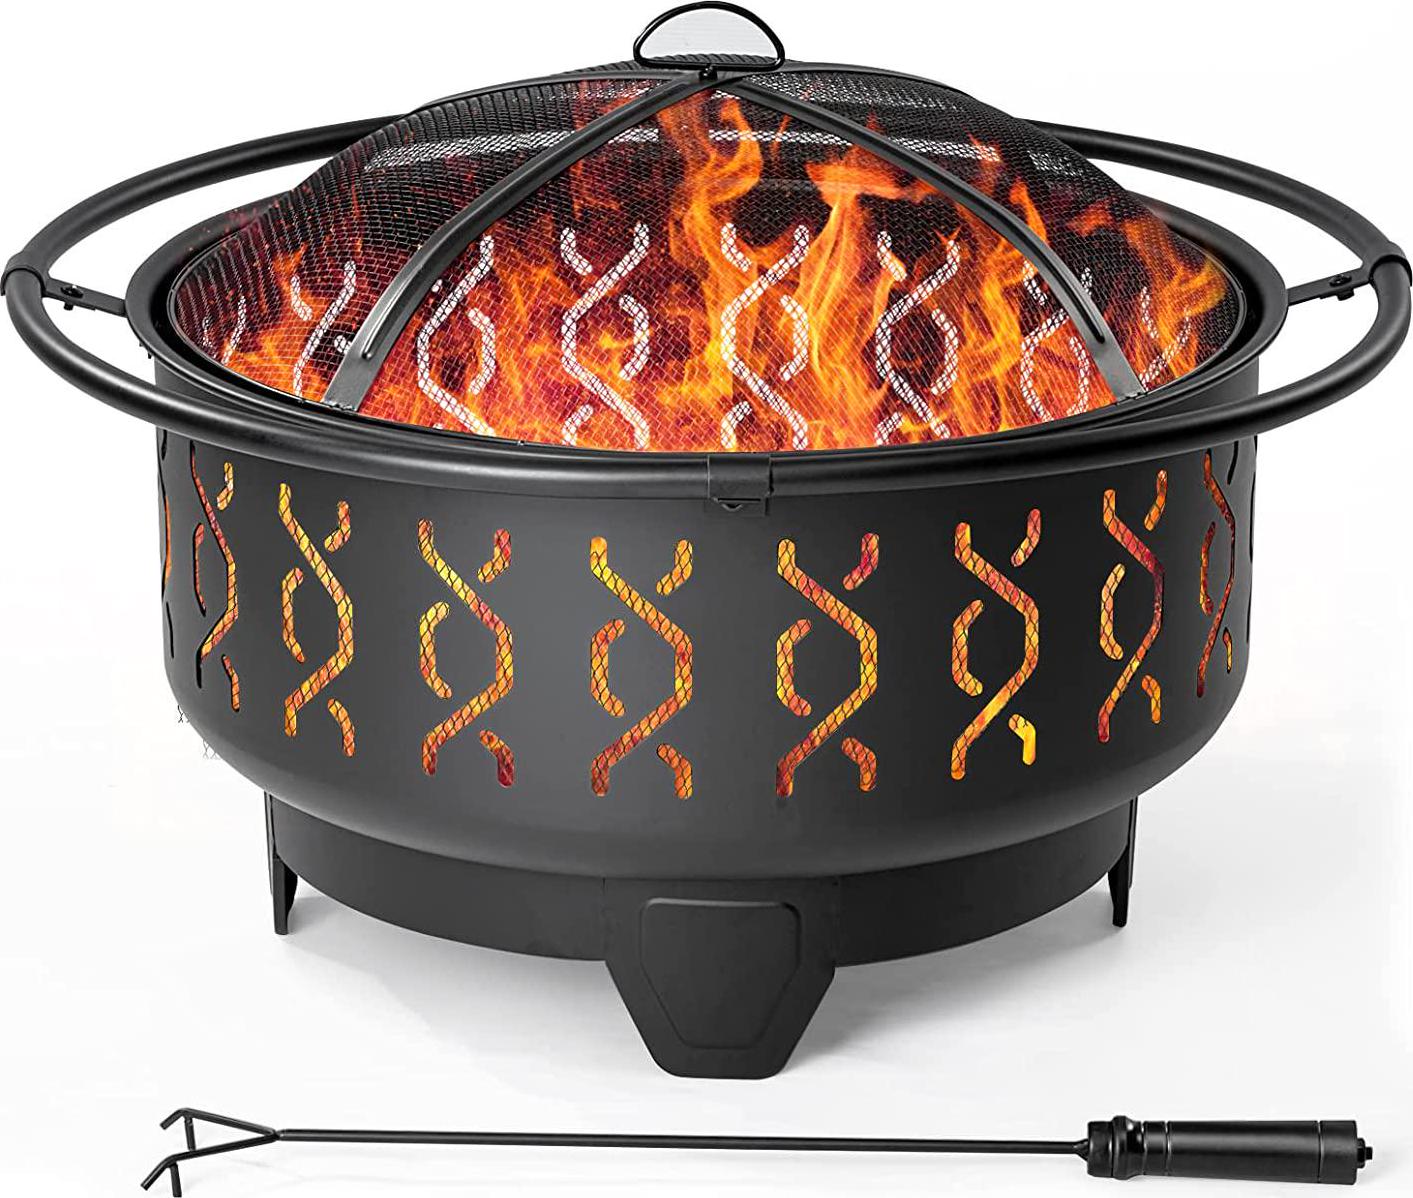 30 Inch Fire Pits for Outside Wood Burning Outdoor Large FirePit Round Steel Firepit for Patio Backyard Garden Outdoor Heating,with Spark Screen,Log Grate,Poker, Black (SFPR-001)-